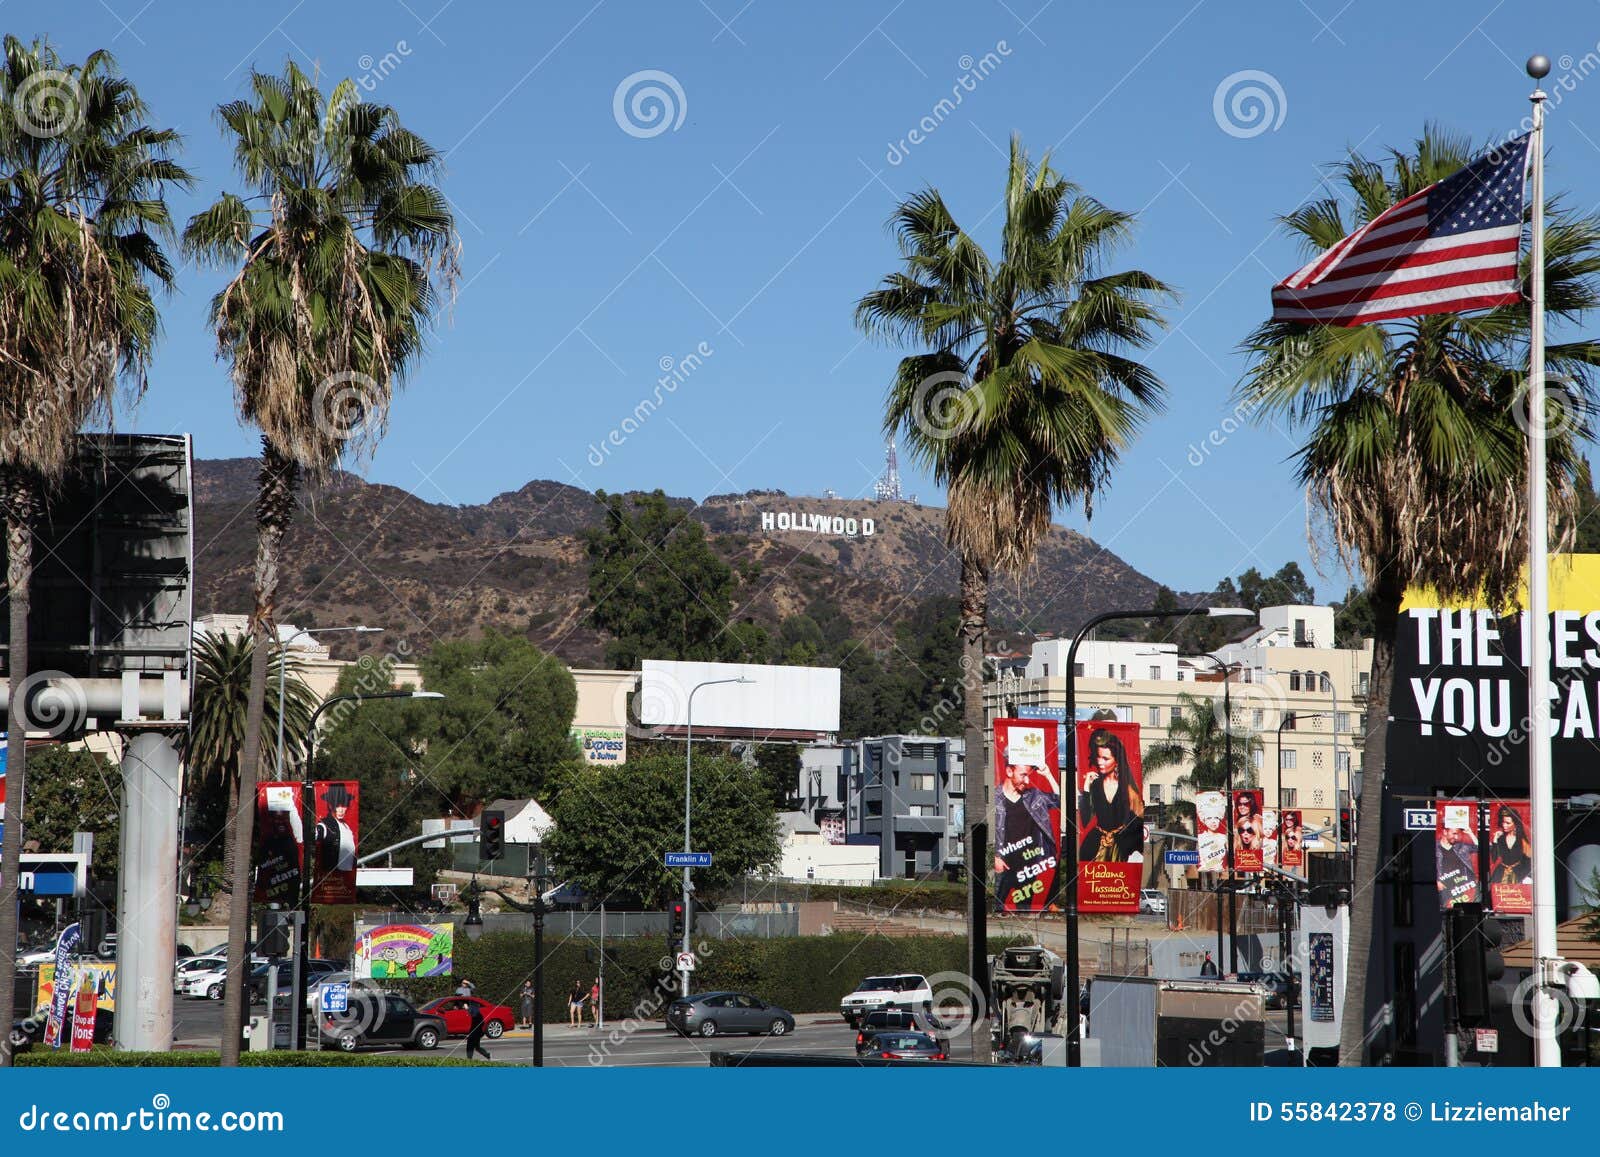 sightseeing in hollywood california